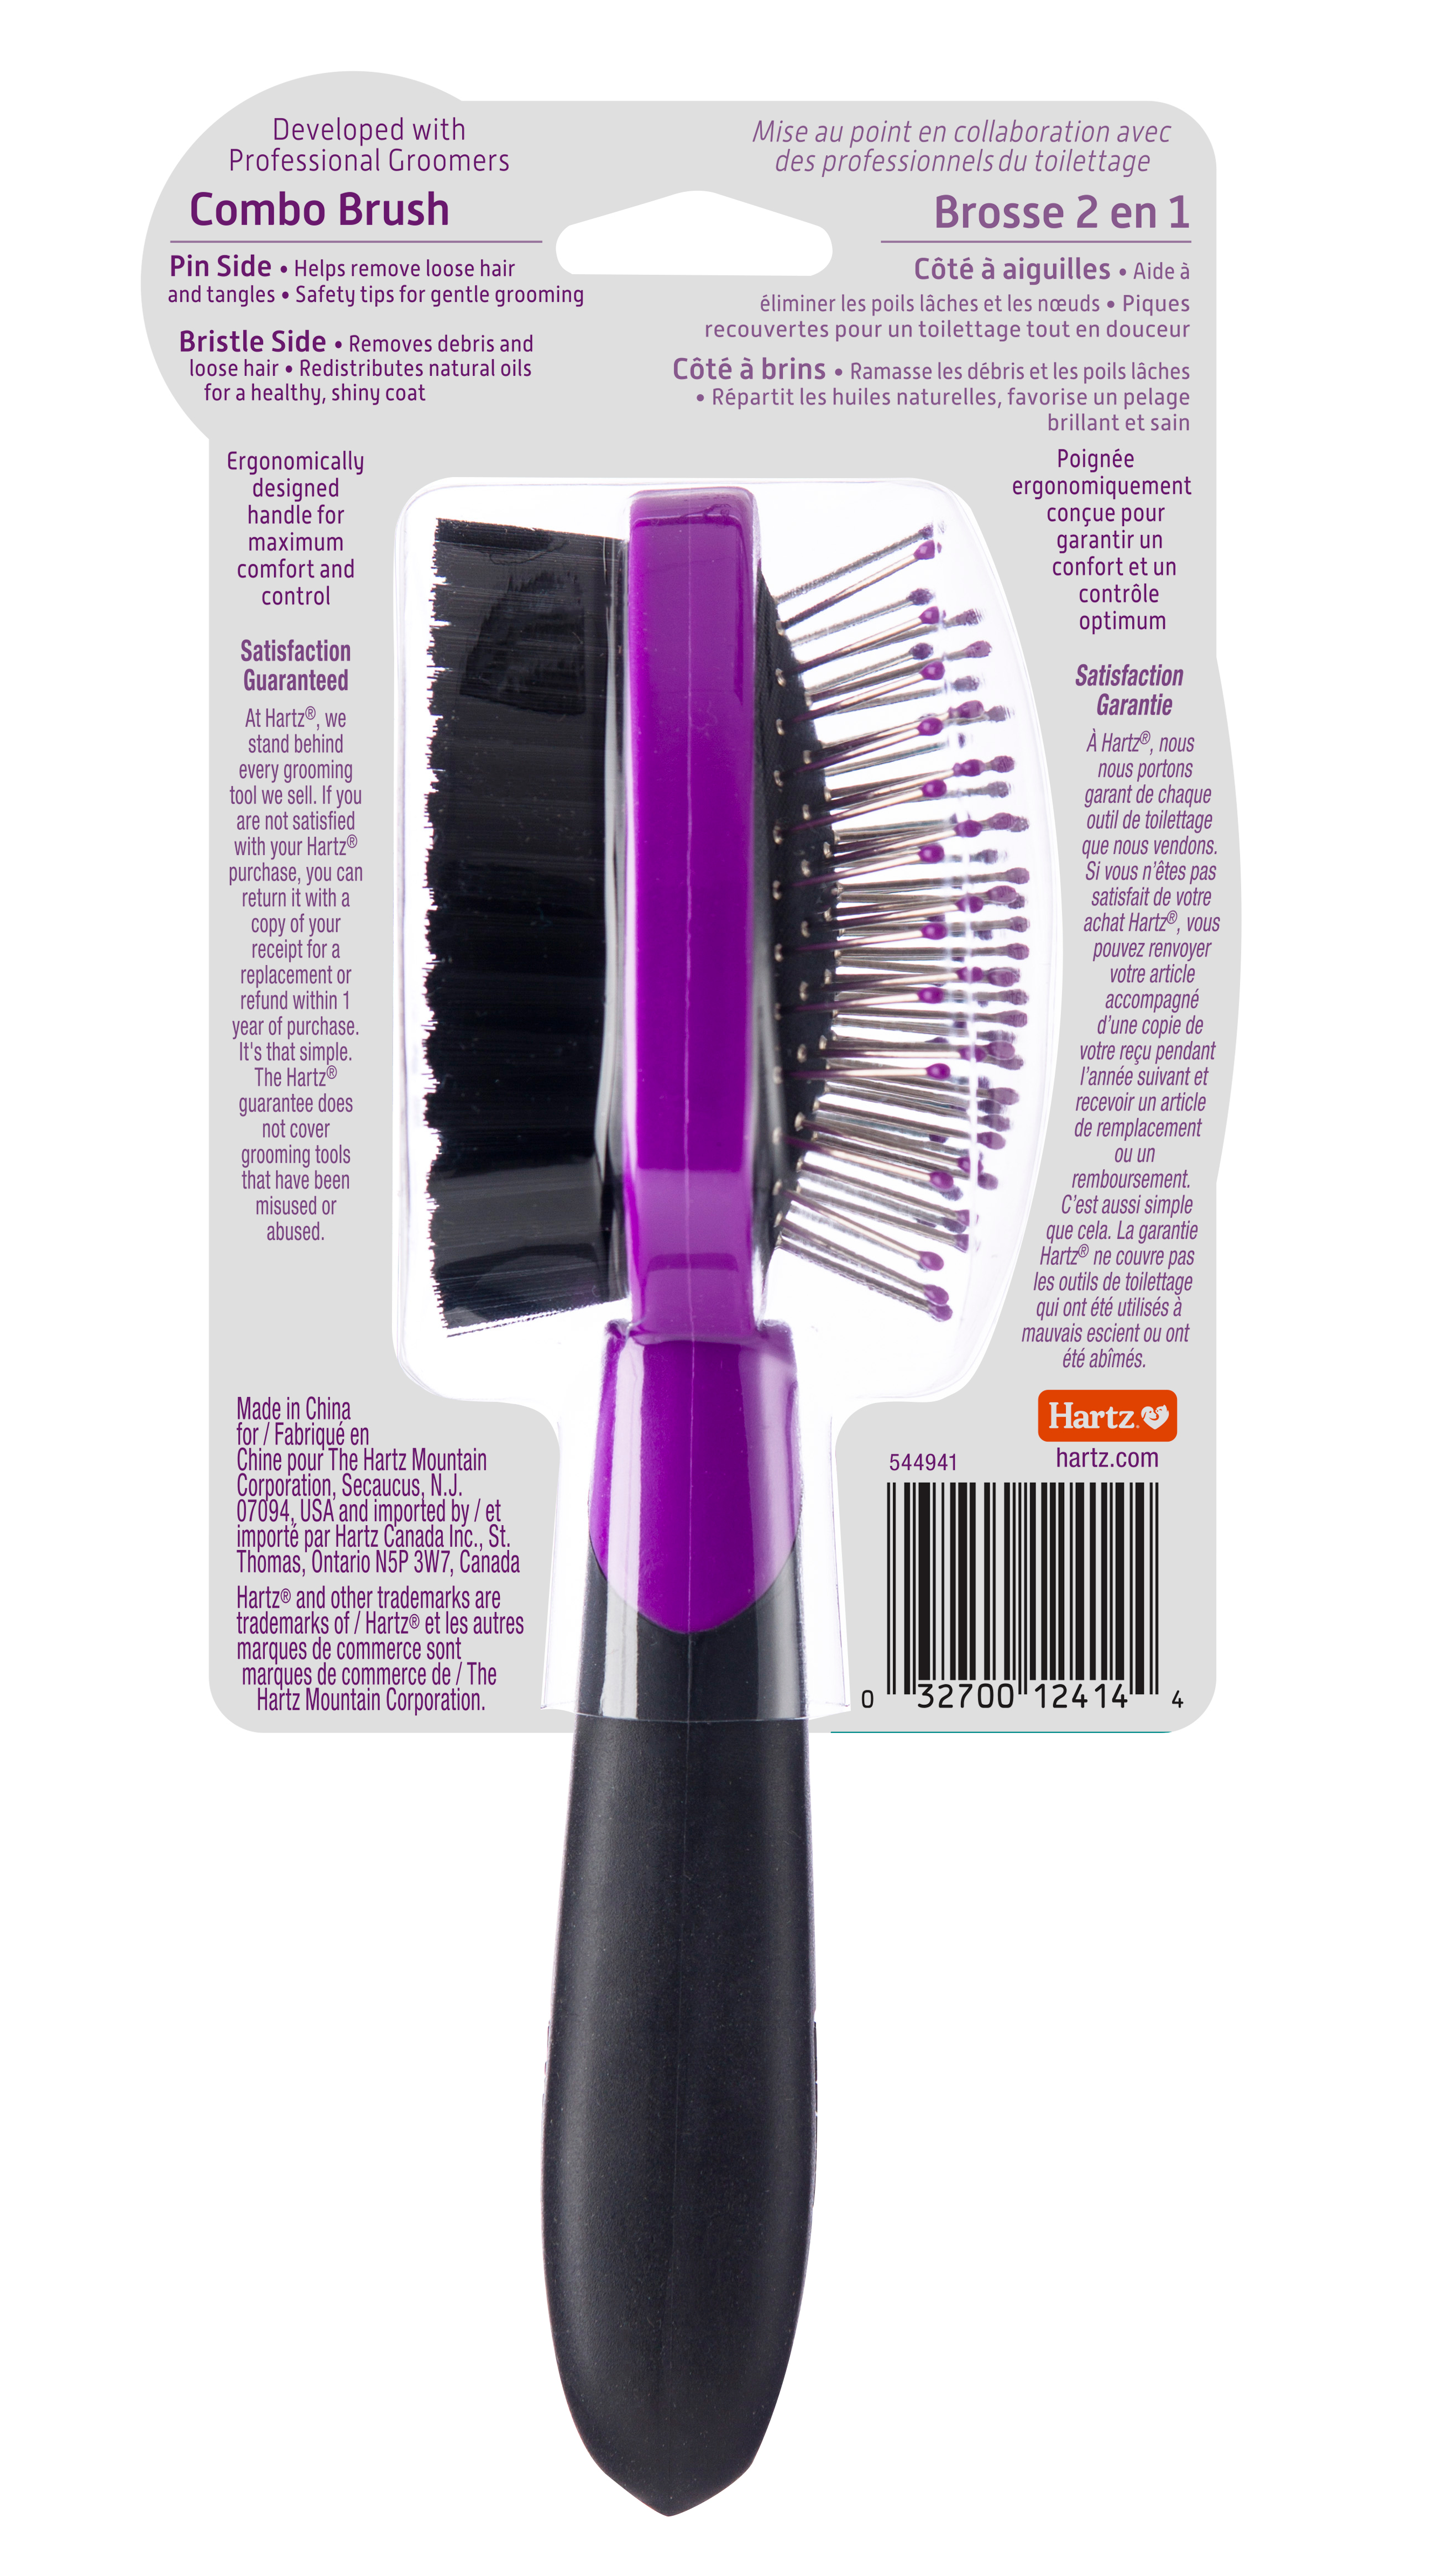 Hartz Groomer's Best Combo Grooming Brush for Cats and Small Dogs - image 2 of 8